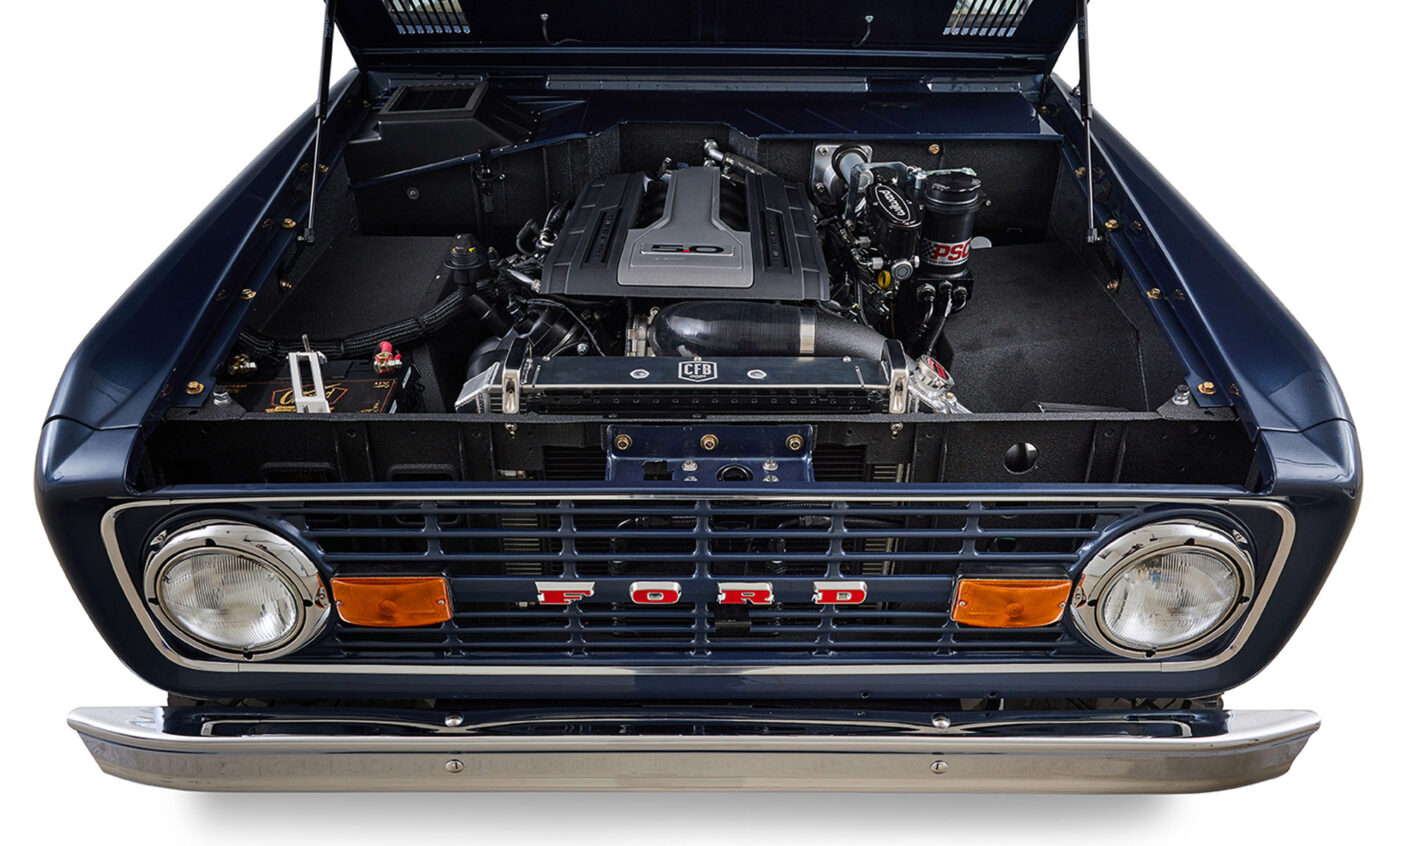 Ford Bronco 1975 Metallic Navy Coyote Series with Custom Diamond Stitch Leather Interior 3rd Gen Coyote 5.0L Engine